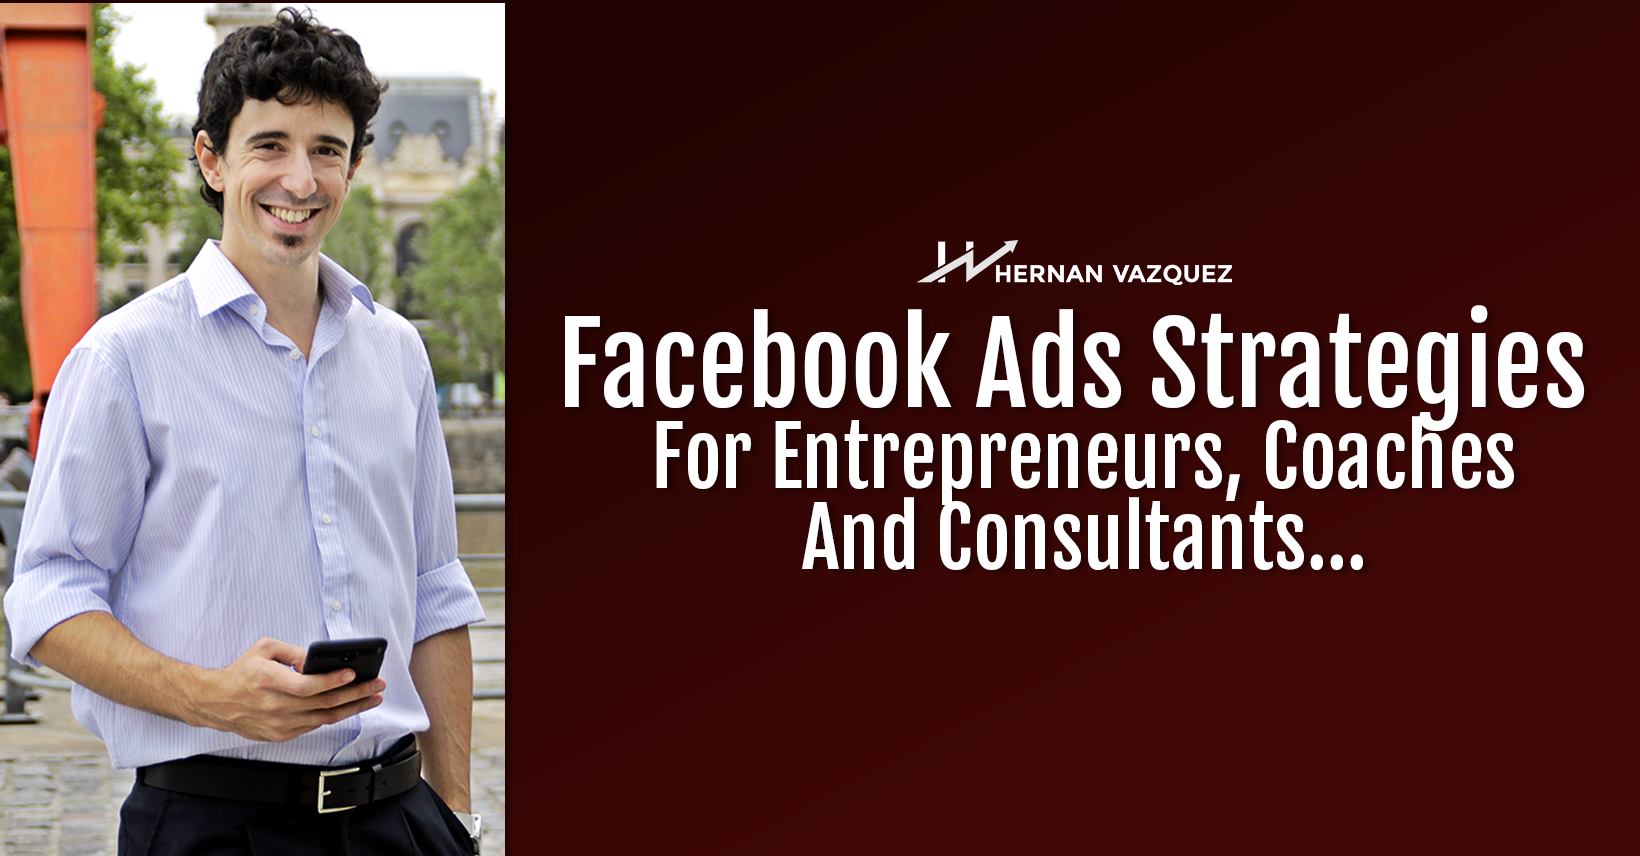 Facebook Ads Strategies For Entrepreneurs, Coaches And Consultants